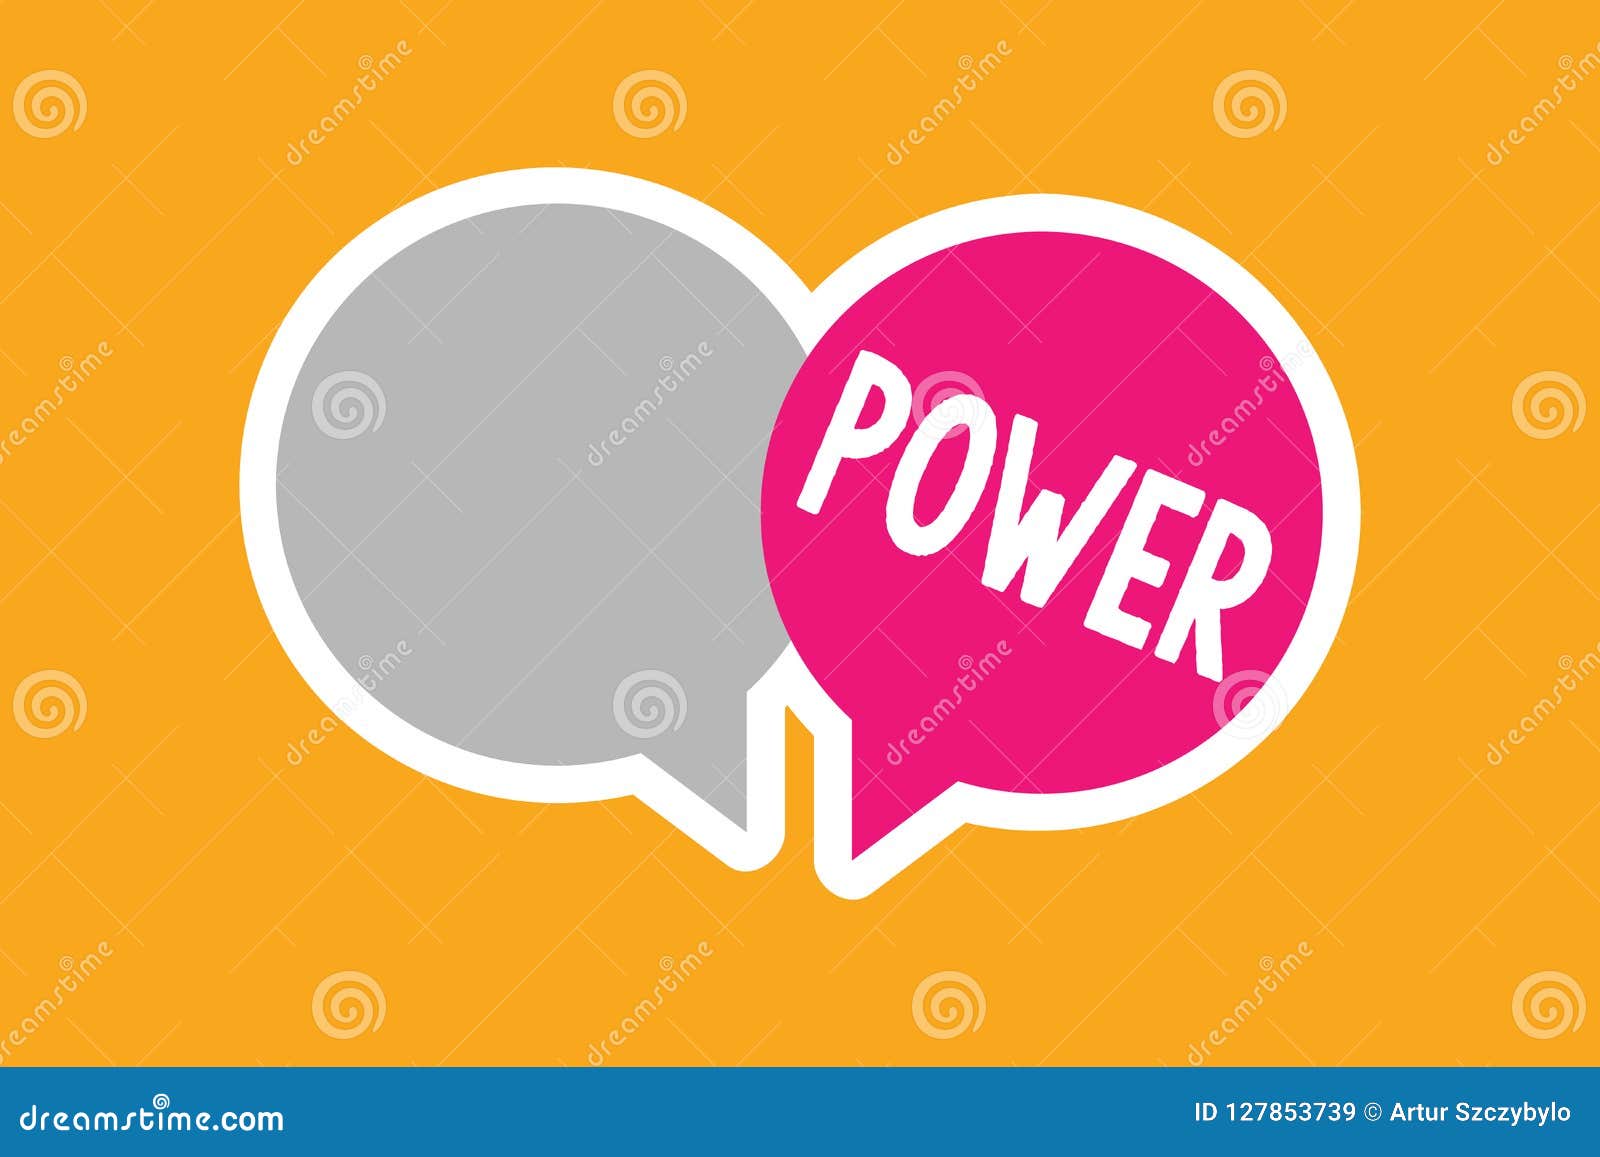 Text Sign Showing Power Conceptual Photo Ability Capacity To Do Something Or Act In Particular Way Electricity Stock Illustration Illustration Of Motivated Strong